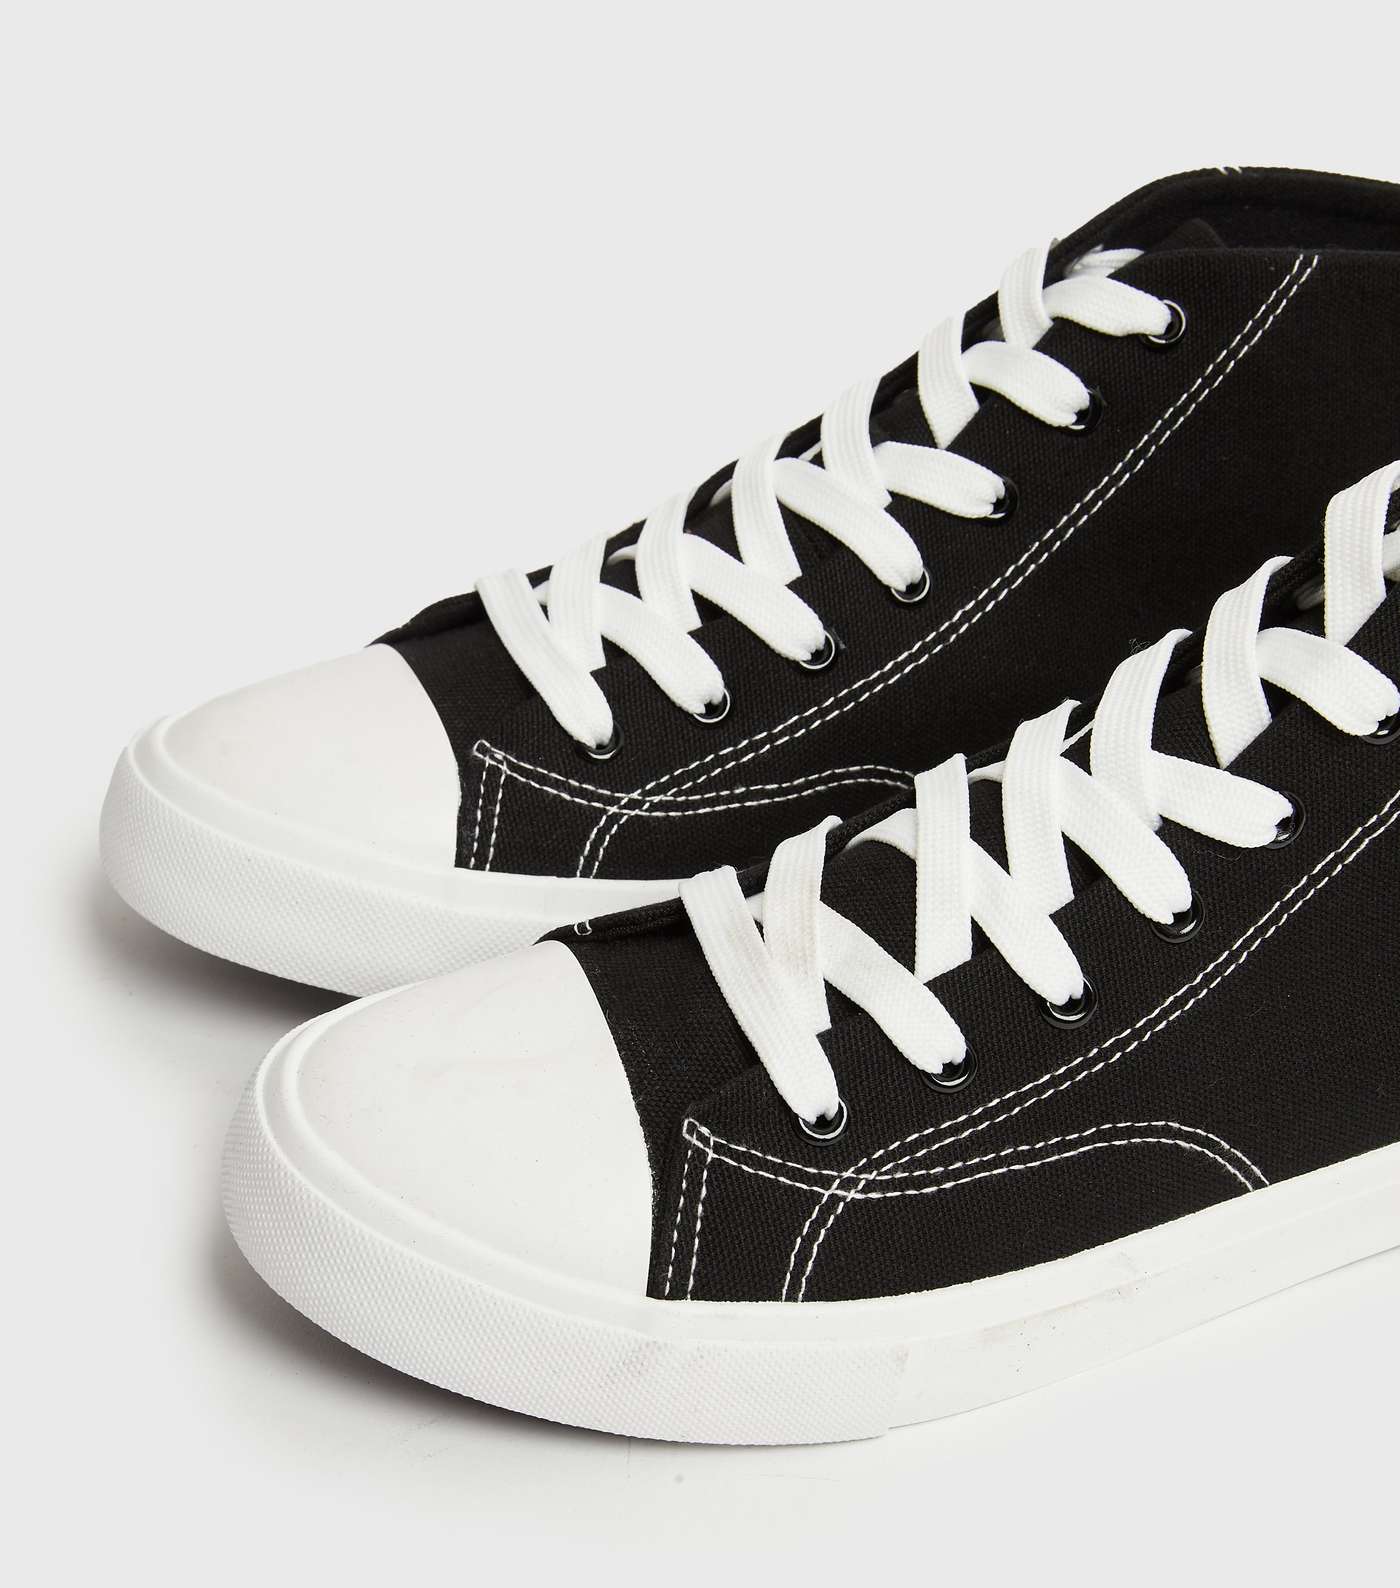 Black Canvas High Top Trainers Image 4